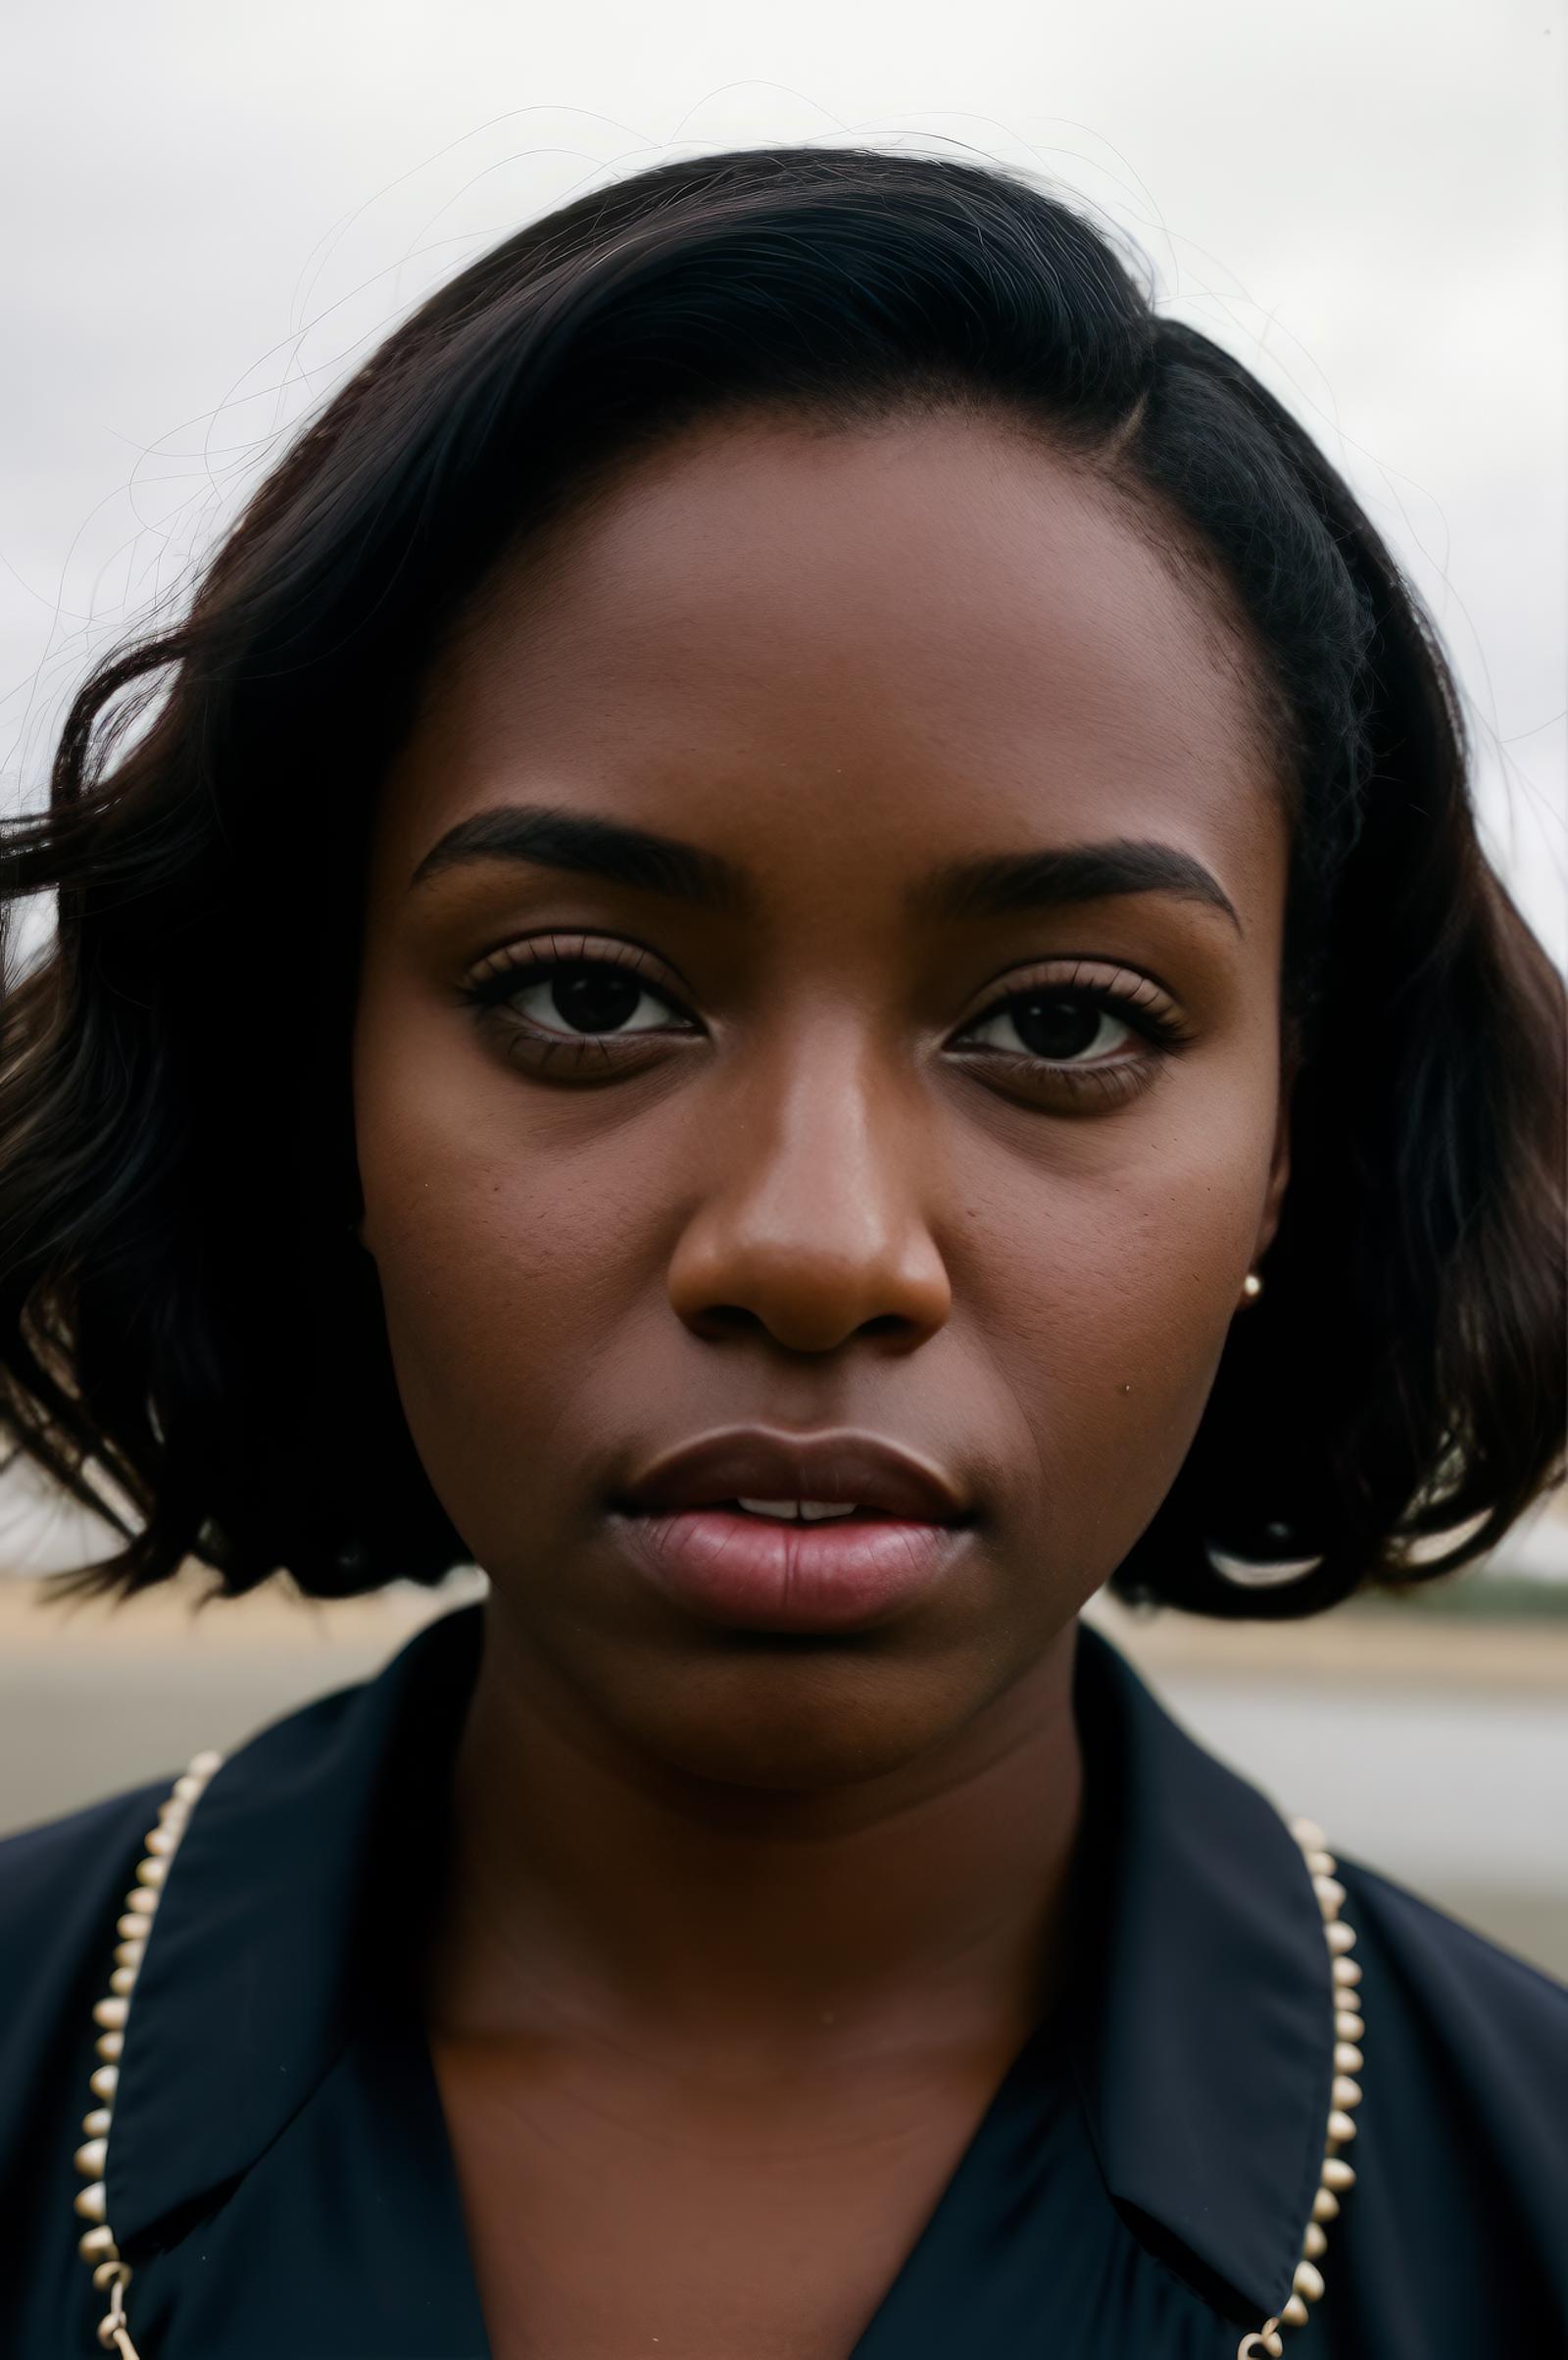 A close-up of a woman with a short haircut, dark skin, and a nose, wearing a black jacket and looking at the camera.